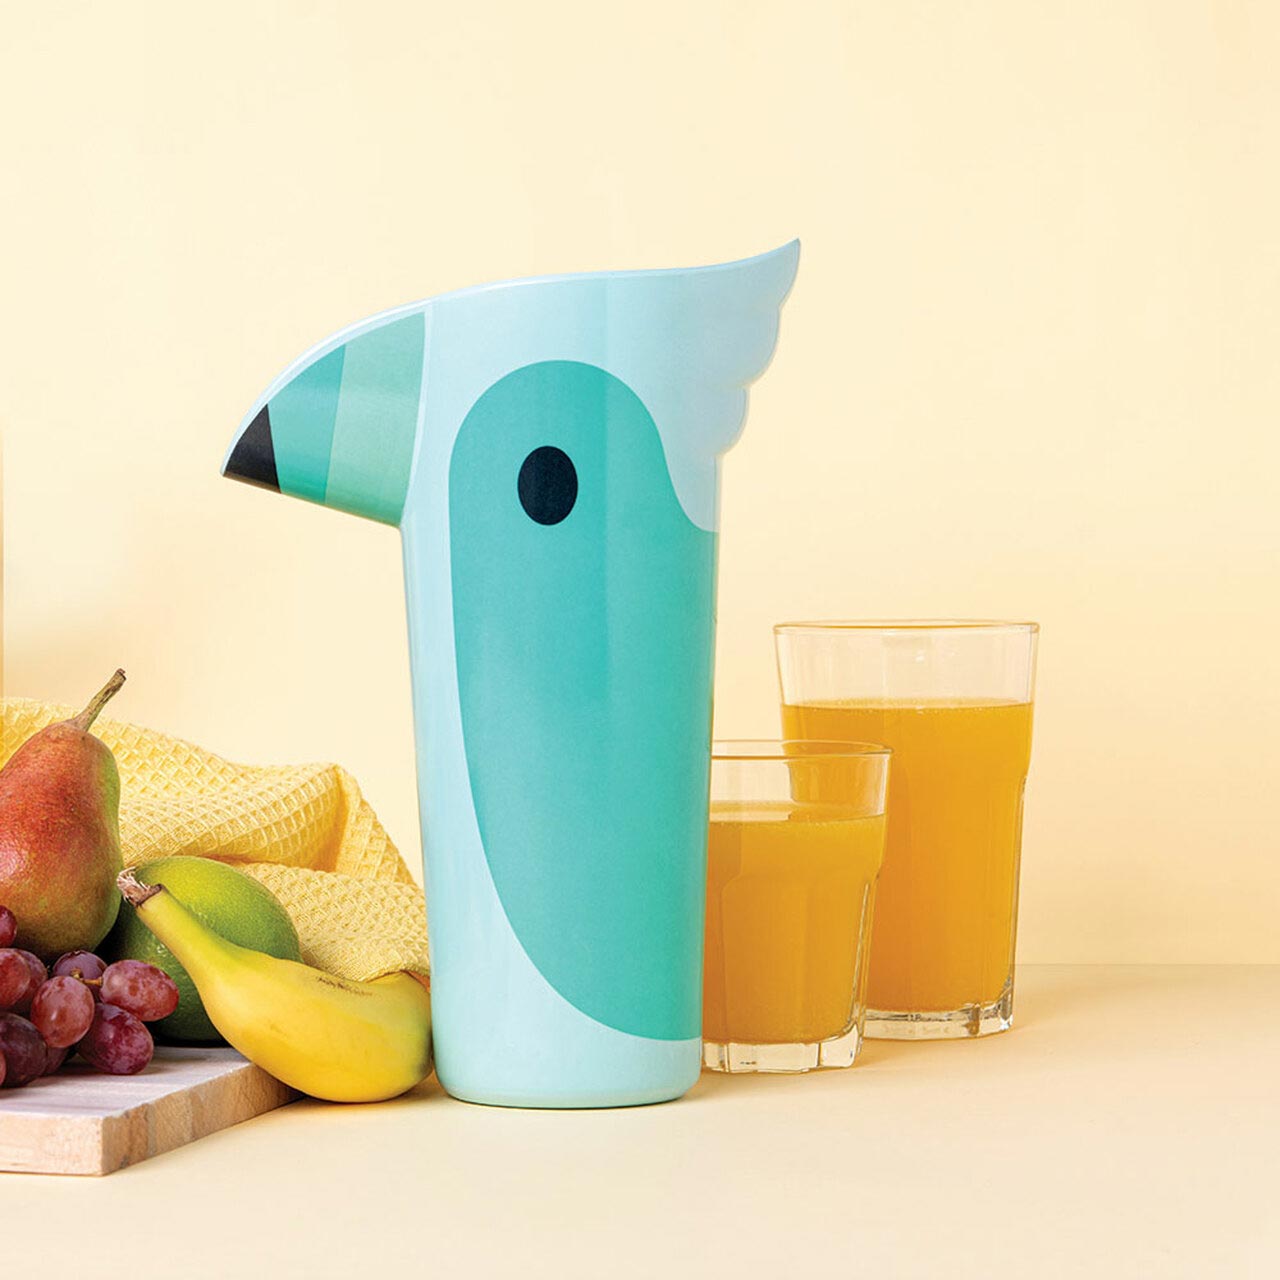 Toucan Polly Pitcher in Turquoise by Ototo | the design gift shop